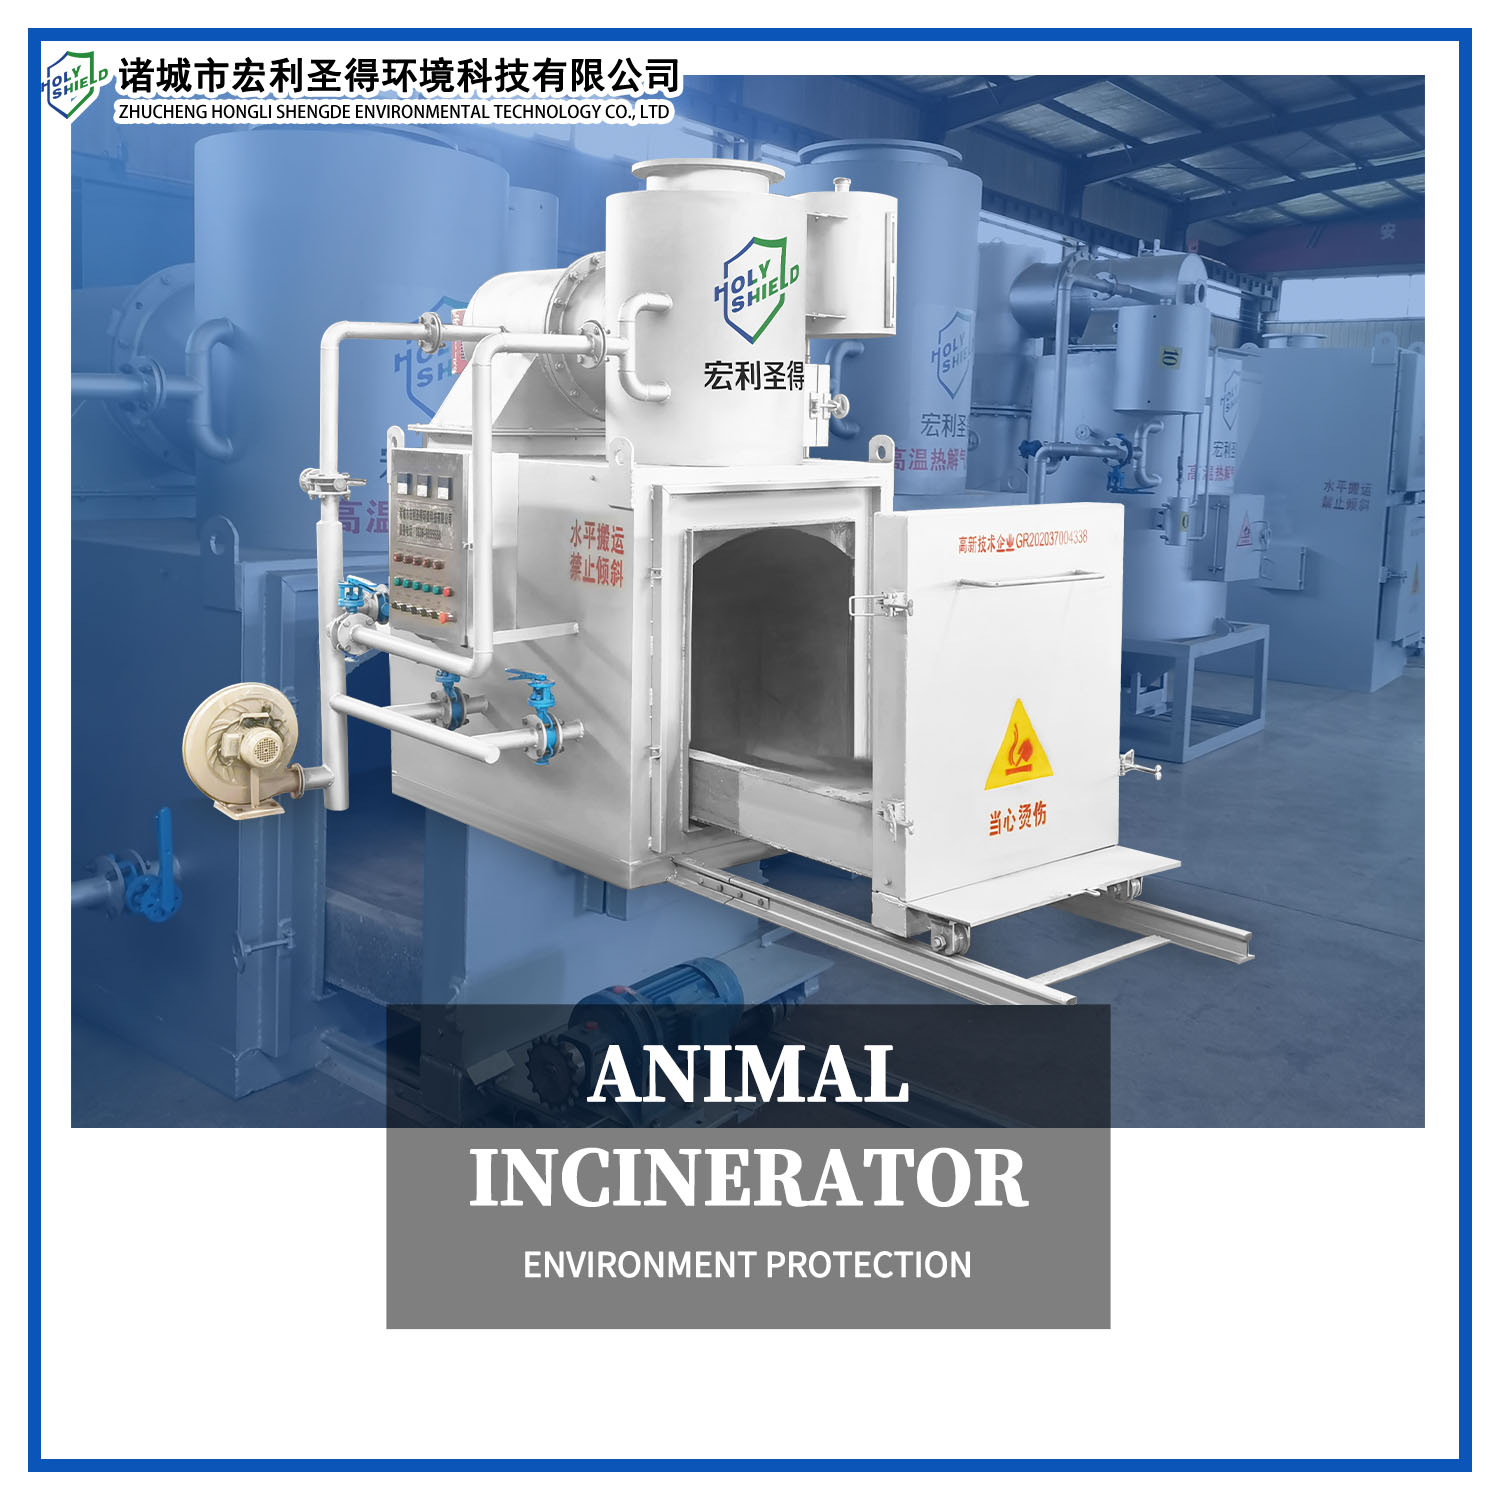 Economical, applicable, no pollution! This pet incinerator really works!